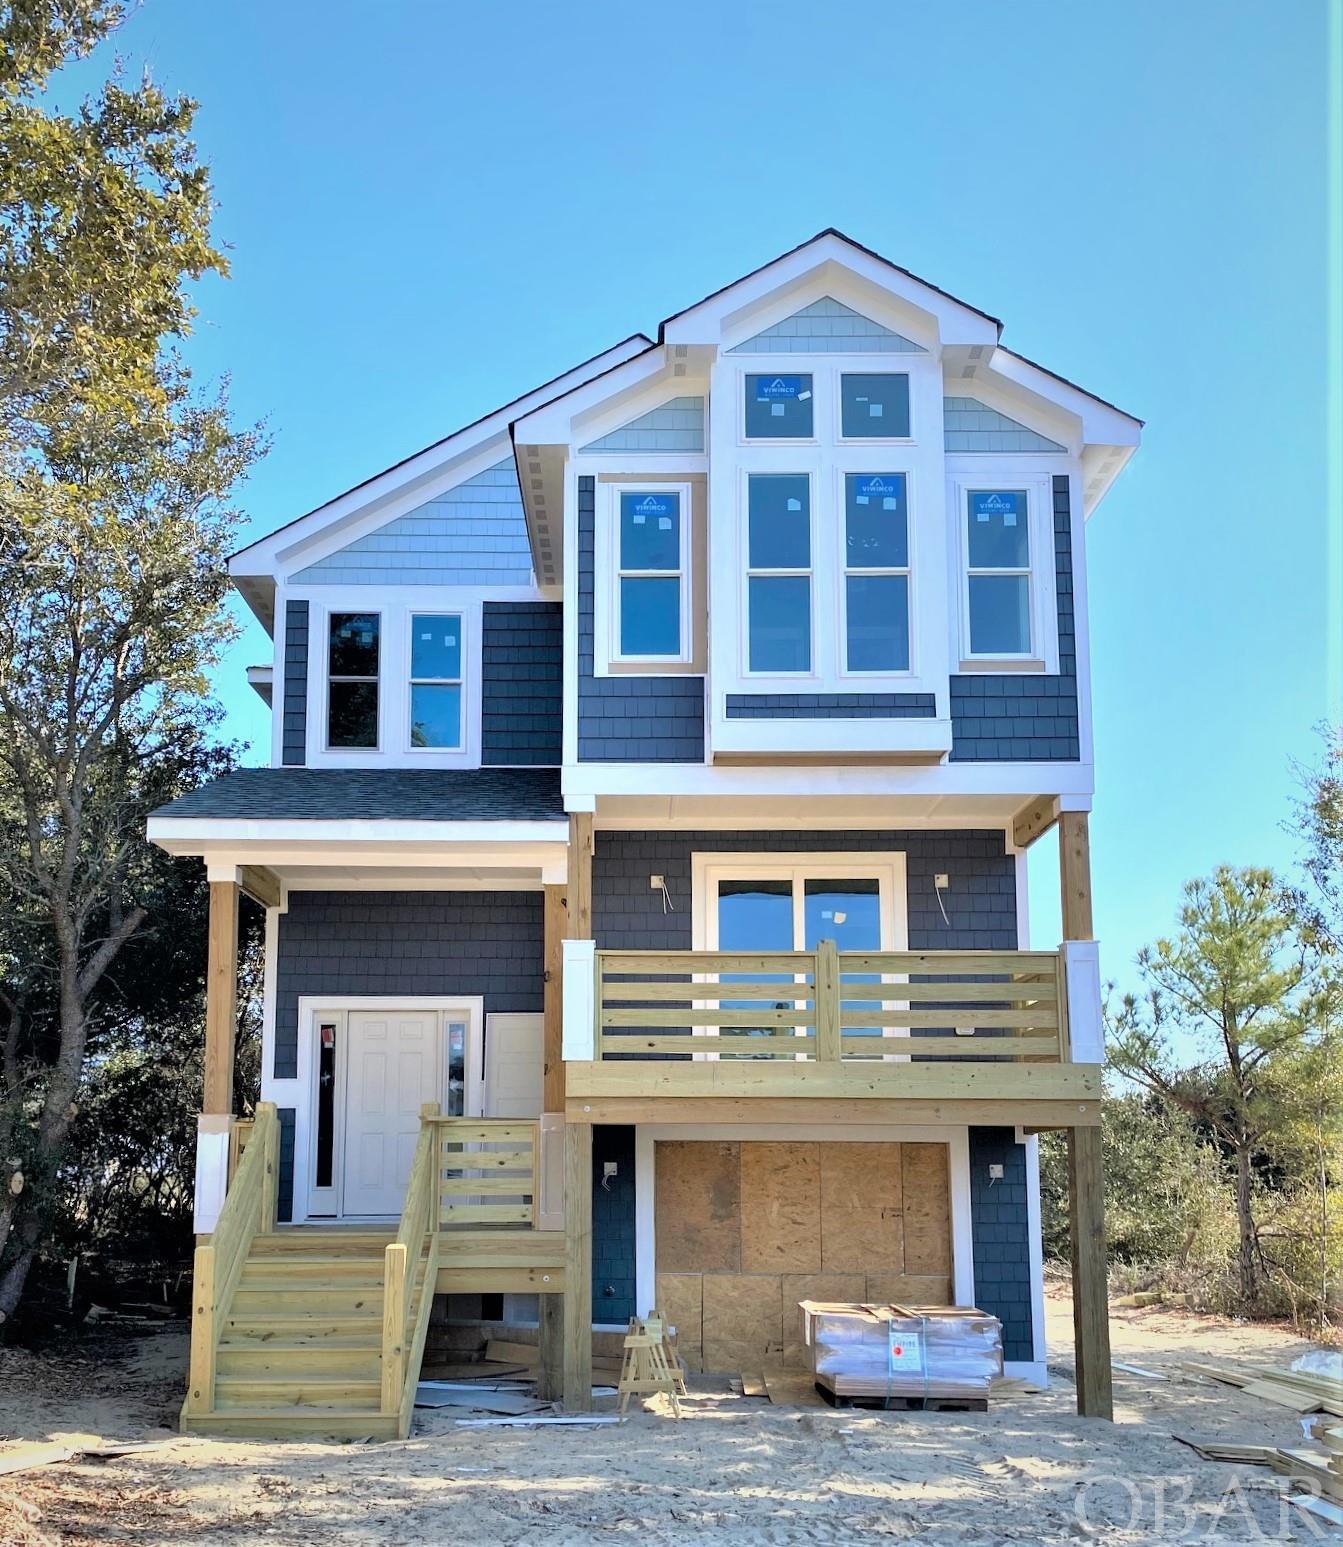 4323 Seascape Drive Lot 432 Outer Banks Home Listings - Holleay Parcker - Spinnaker Realty Outer Banks (OBX) Real Estate